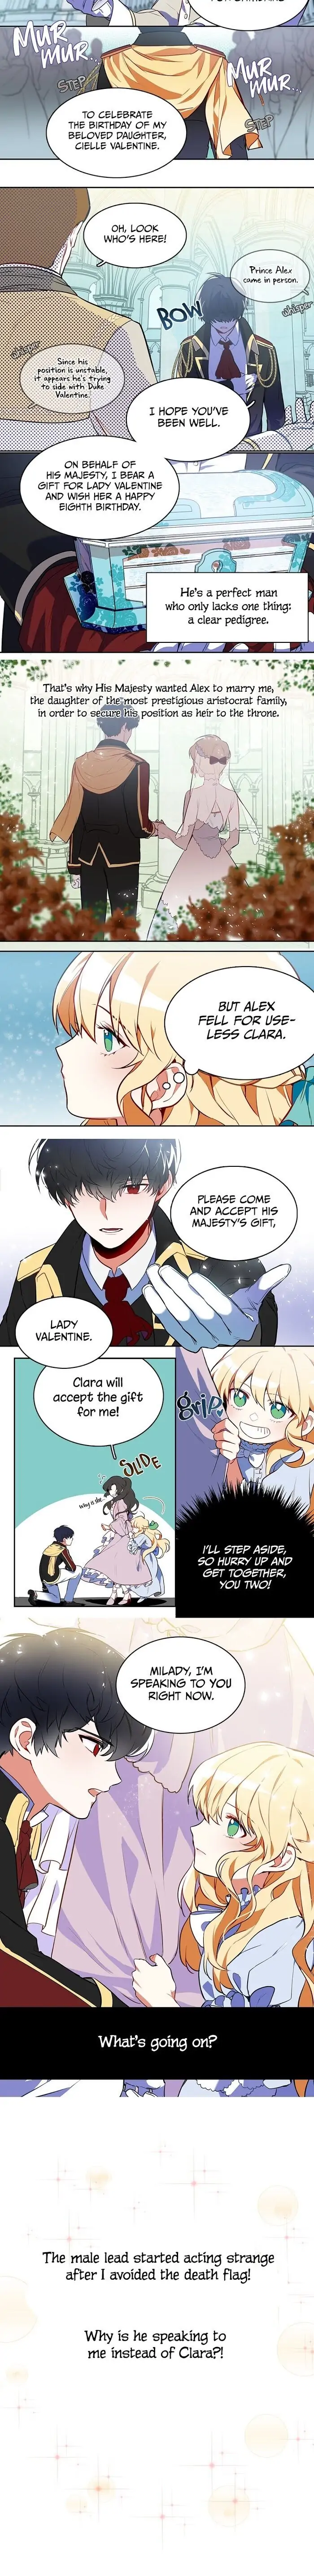 The hero proposed to me chapter 0